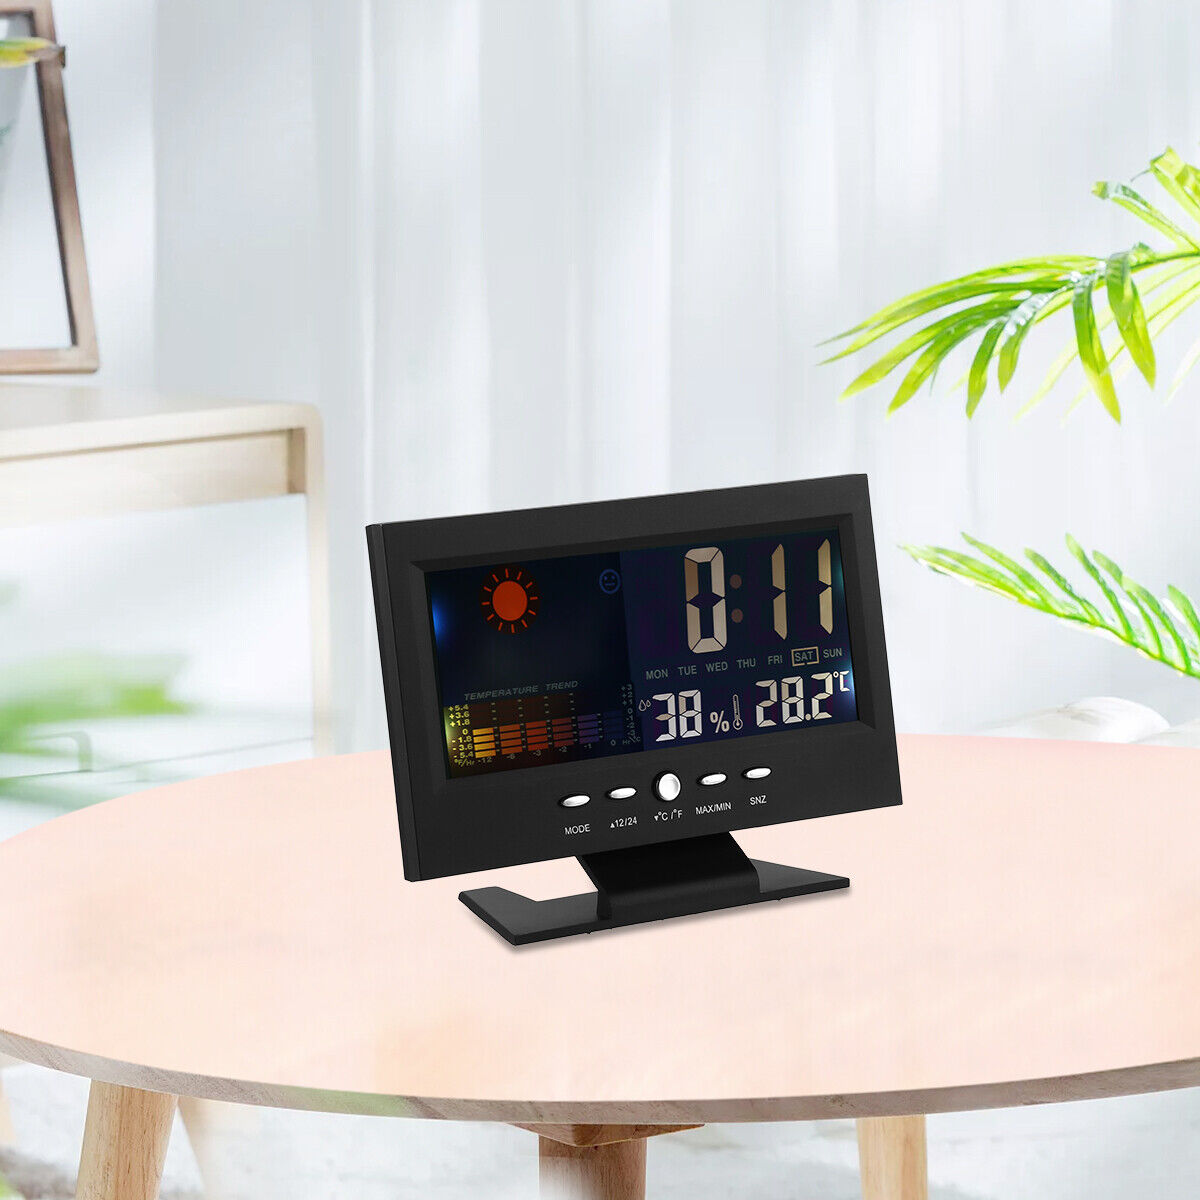 Digital LED Alarm Clock with Snooze, Calendar, Thermometer, Hygrometer & Weather Display